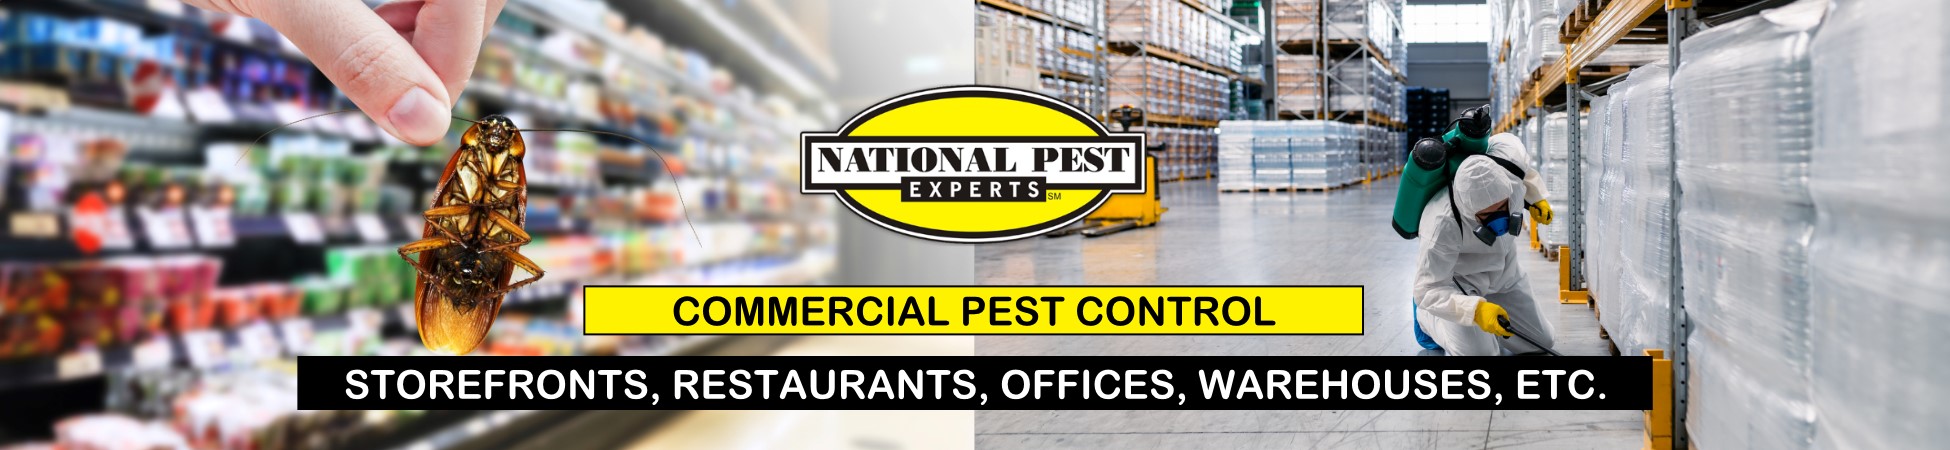 National Pest Experts - Commercial & Industrial exterminating and pest control in Huntington, NY